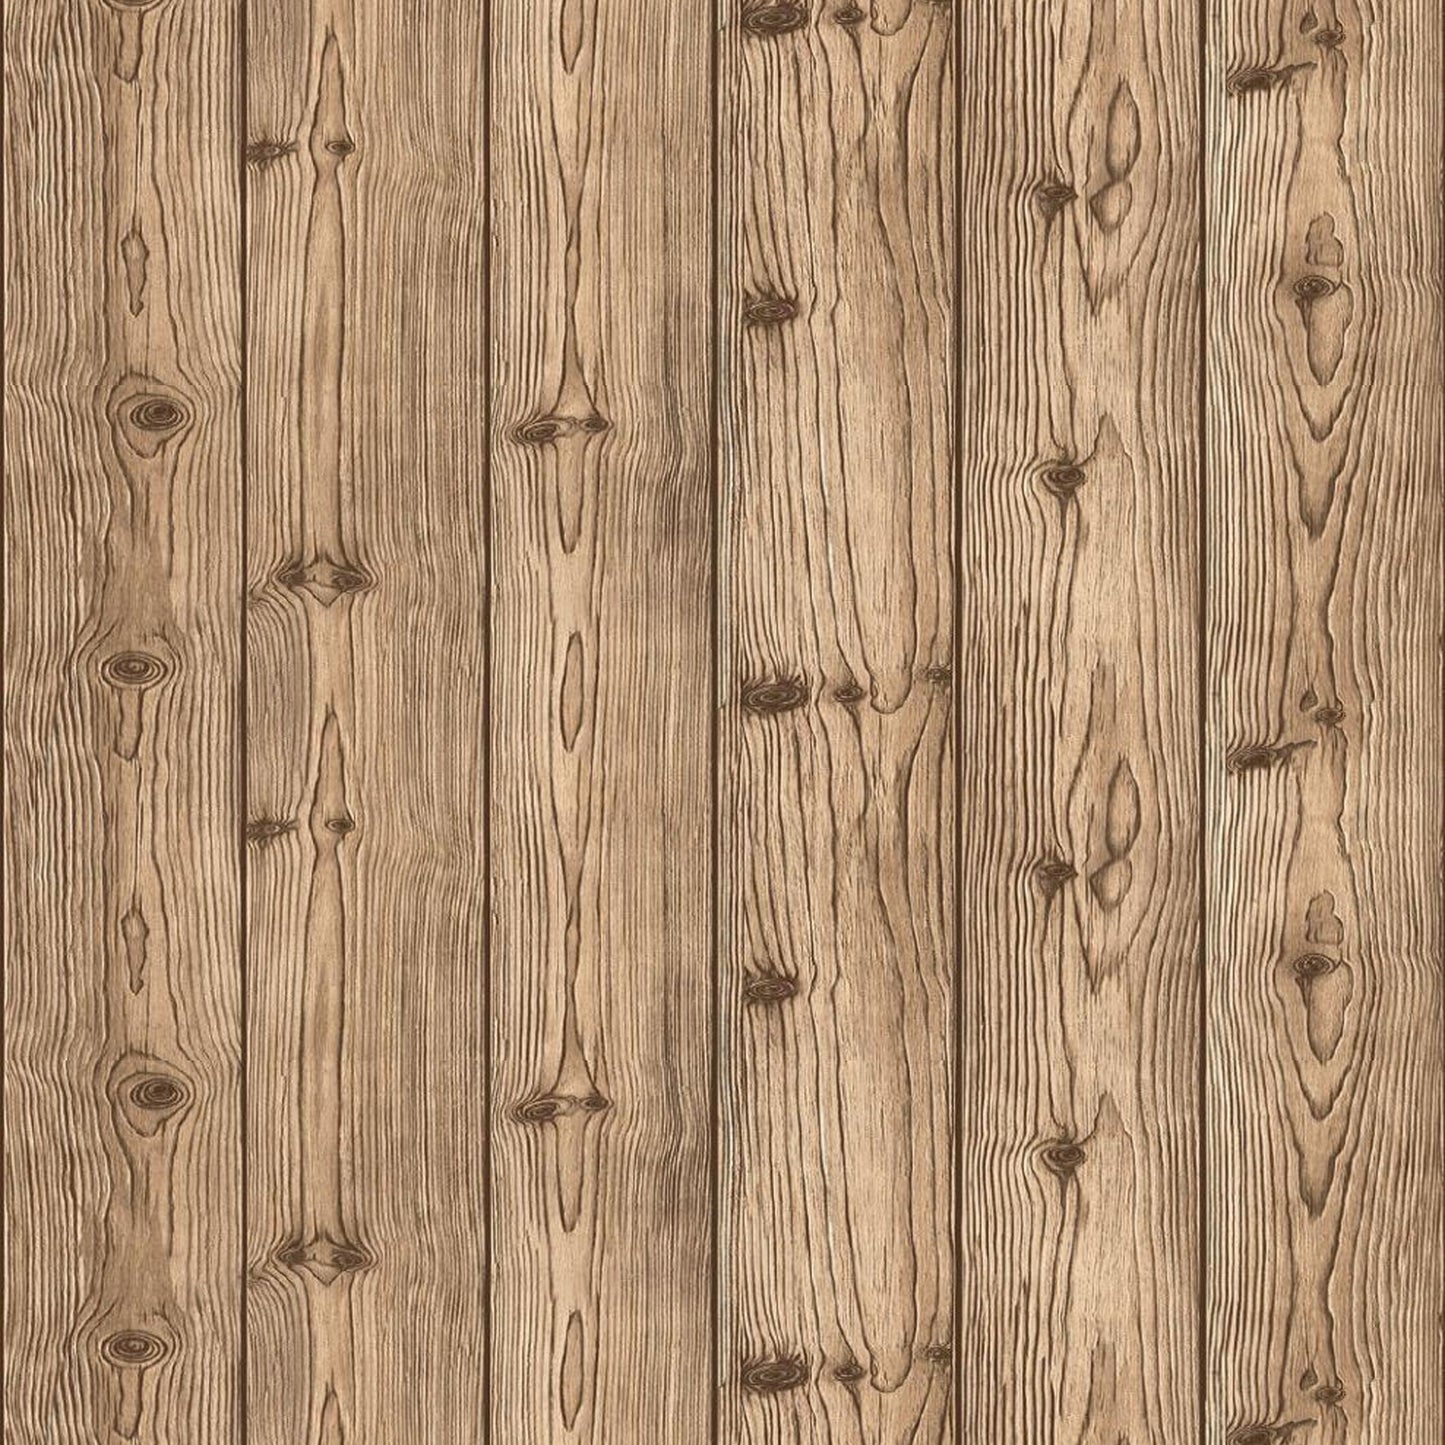 Wooden Whispers Texture Wallpaper